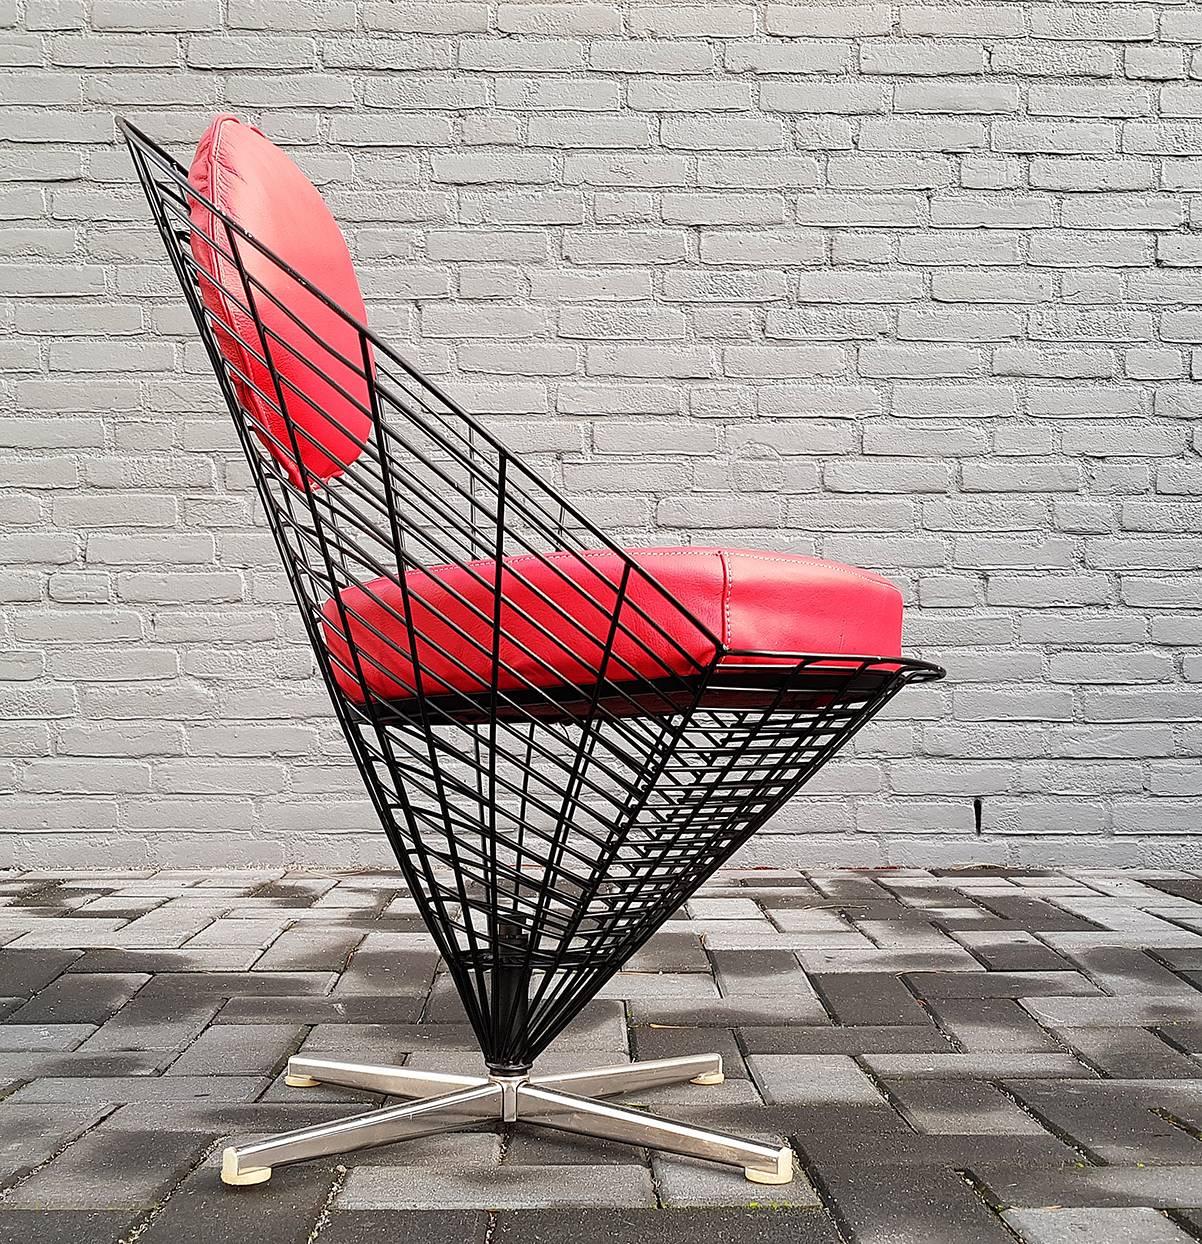 - Black 'K2' wire cone lounge chair by Verner Panton
- Manufactured by Plus Linje in the 1960s
- Dimensions: H 76 x W 63 x D 63 cm
- Early edition!
- Reupholstered.